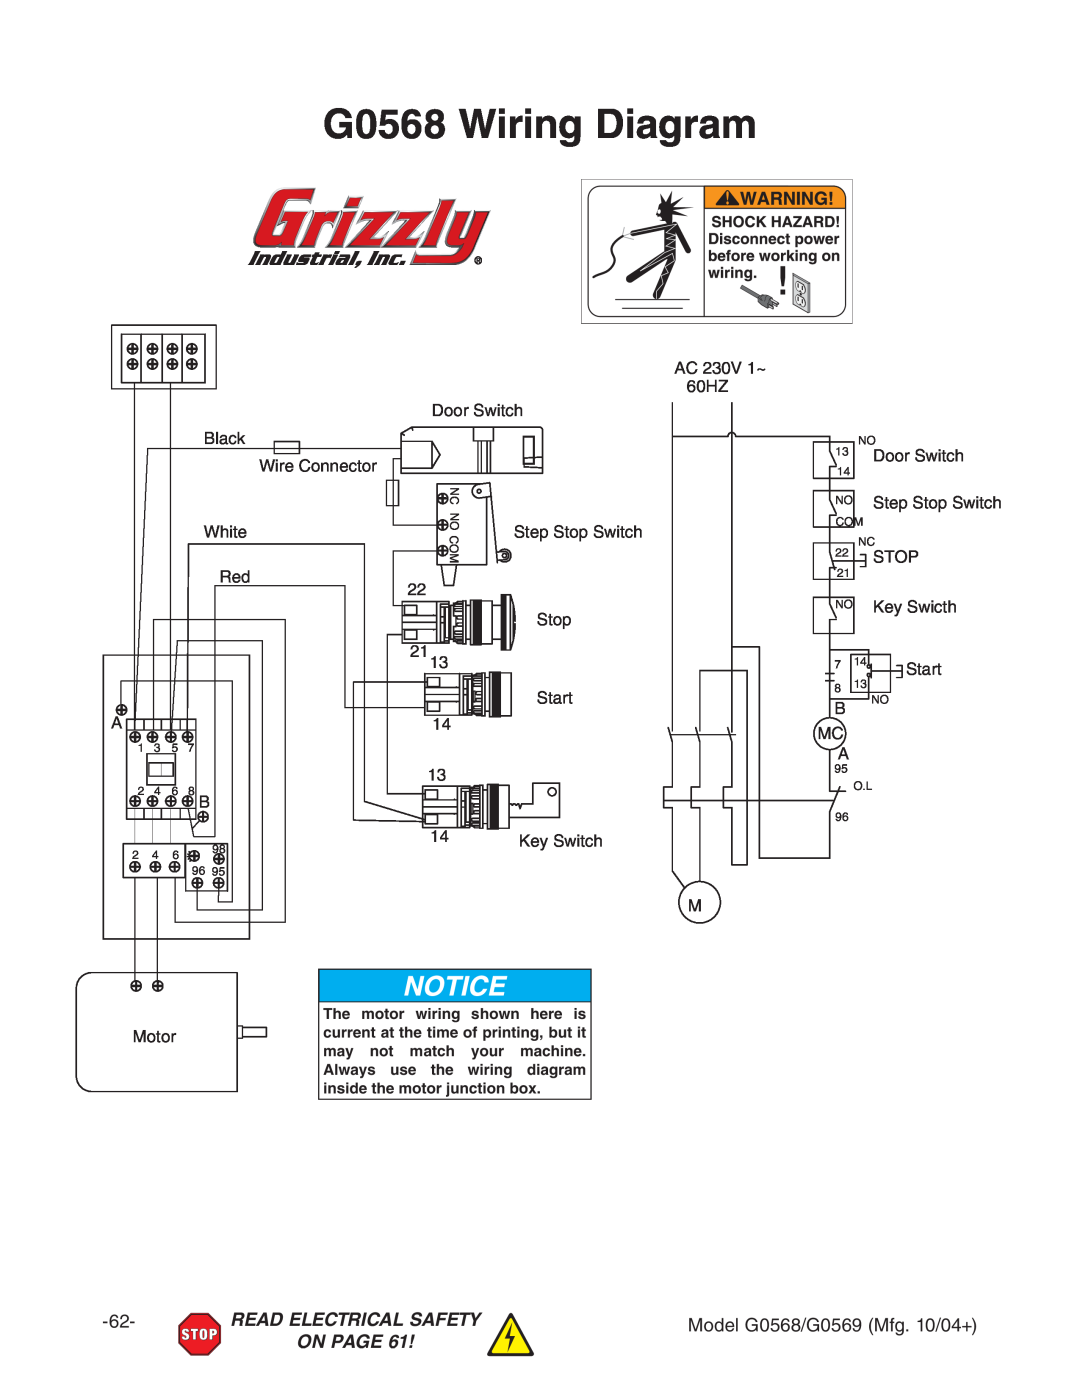 Grizzly G0569 owner manual G0568 Wiring Diagram, Read Electrical Safety, On Page 